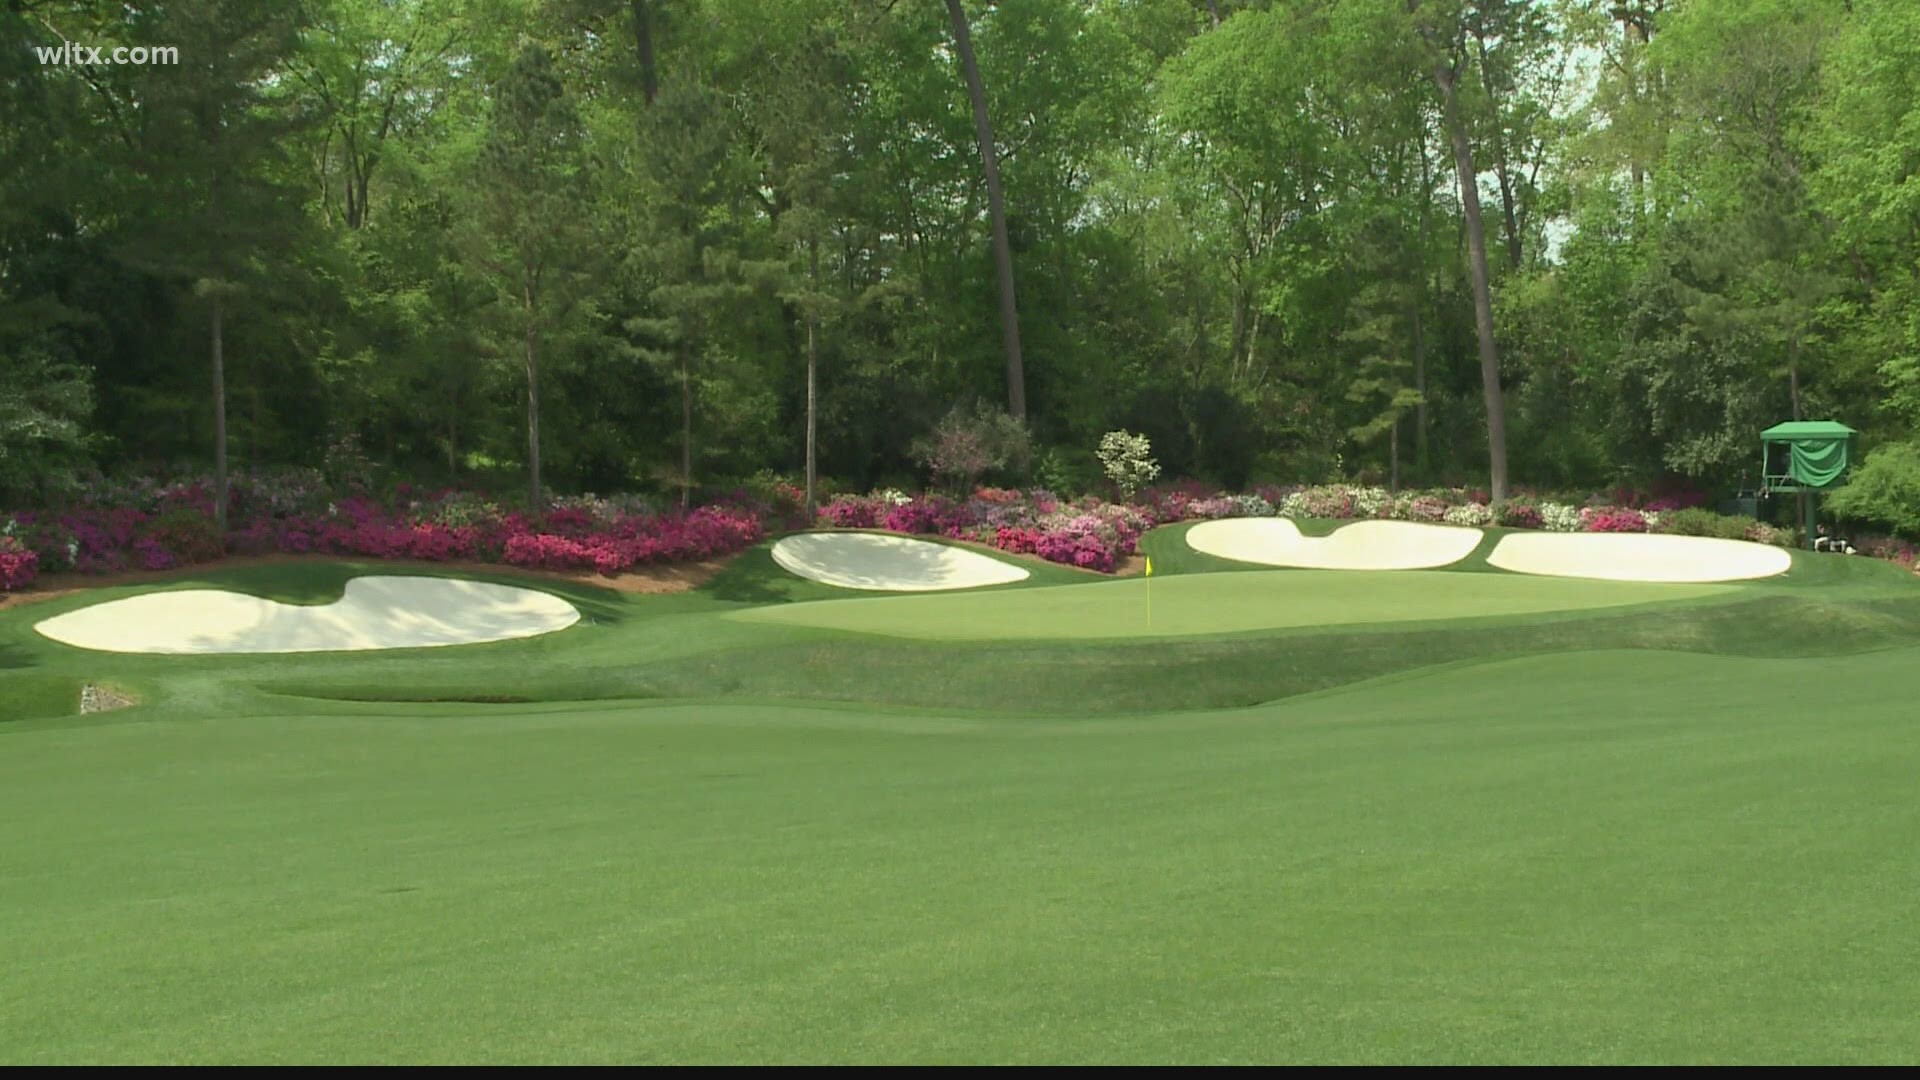 With no fans at the Masters this year due to COVID-19, many businesses in Columbia are feeling the loss of revenue.